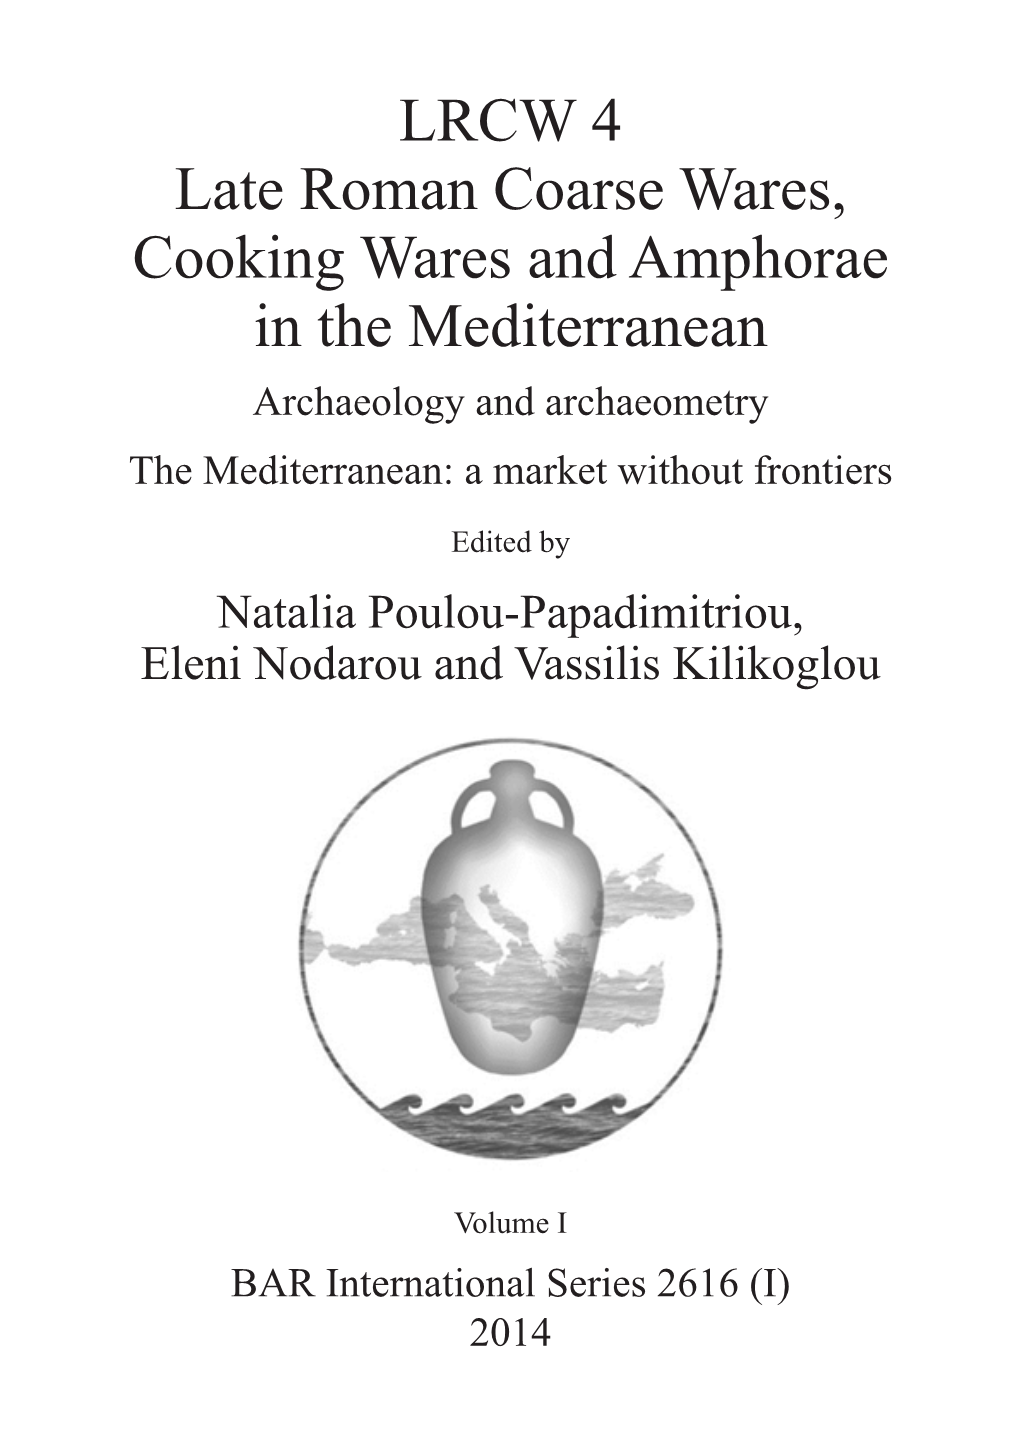 LRCW 4 Late Roman Coarse Wares, Cooking Wares and Amphorae in the Mediterranean Archaeology and Archaeometry